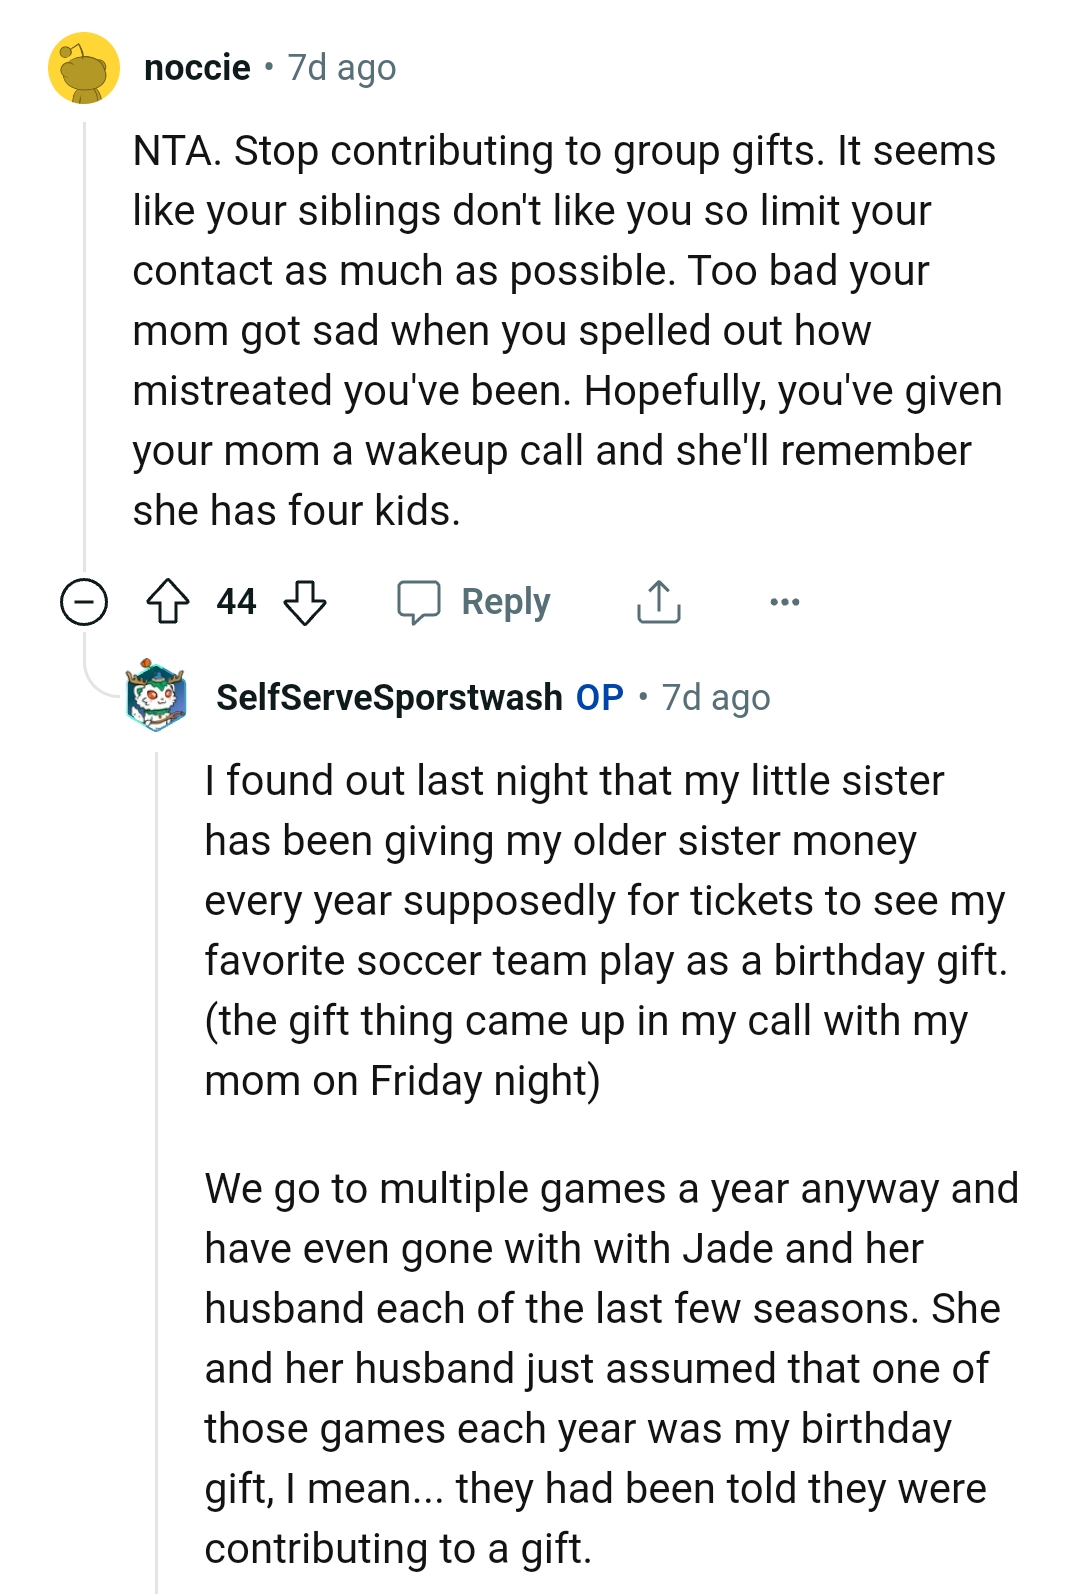 The OP gave her a wake-up call